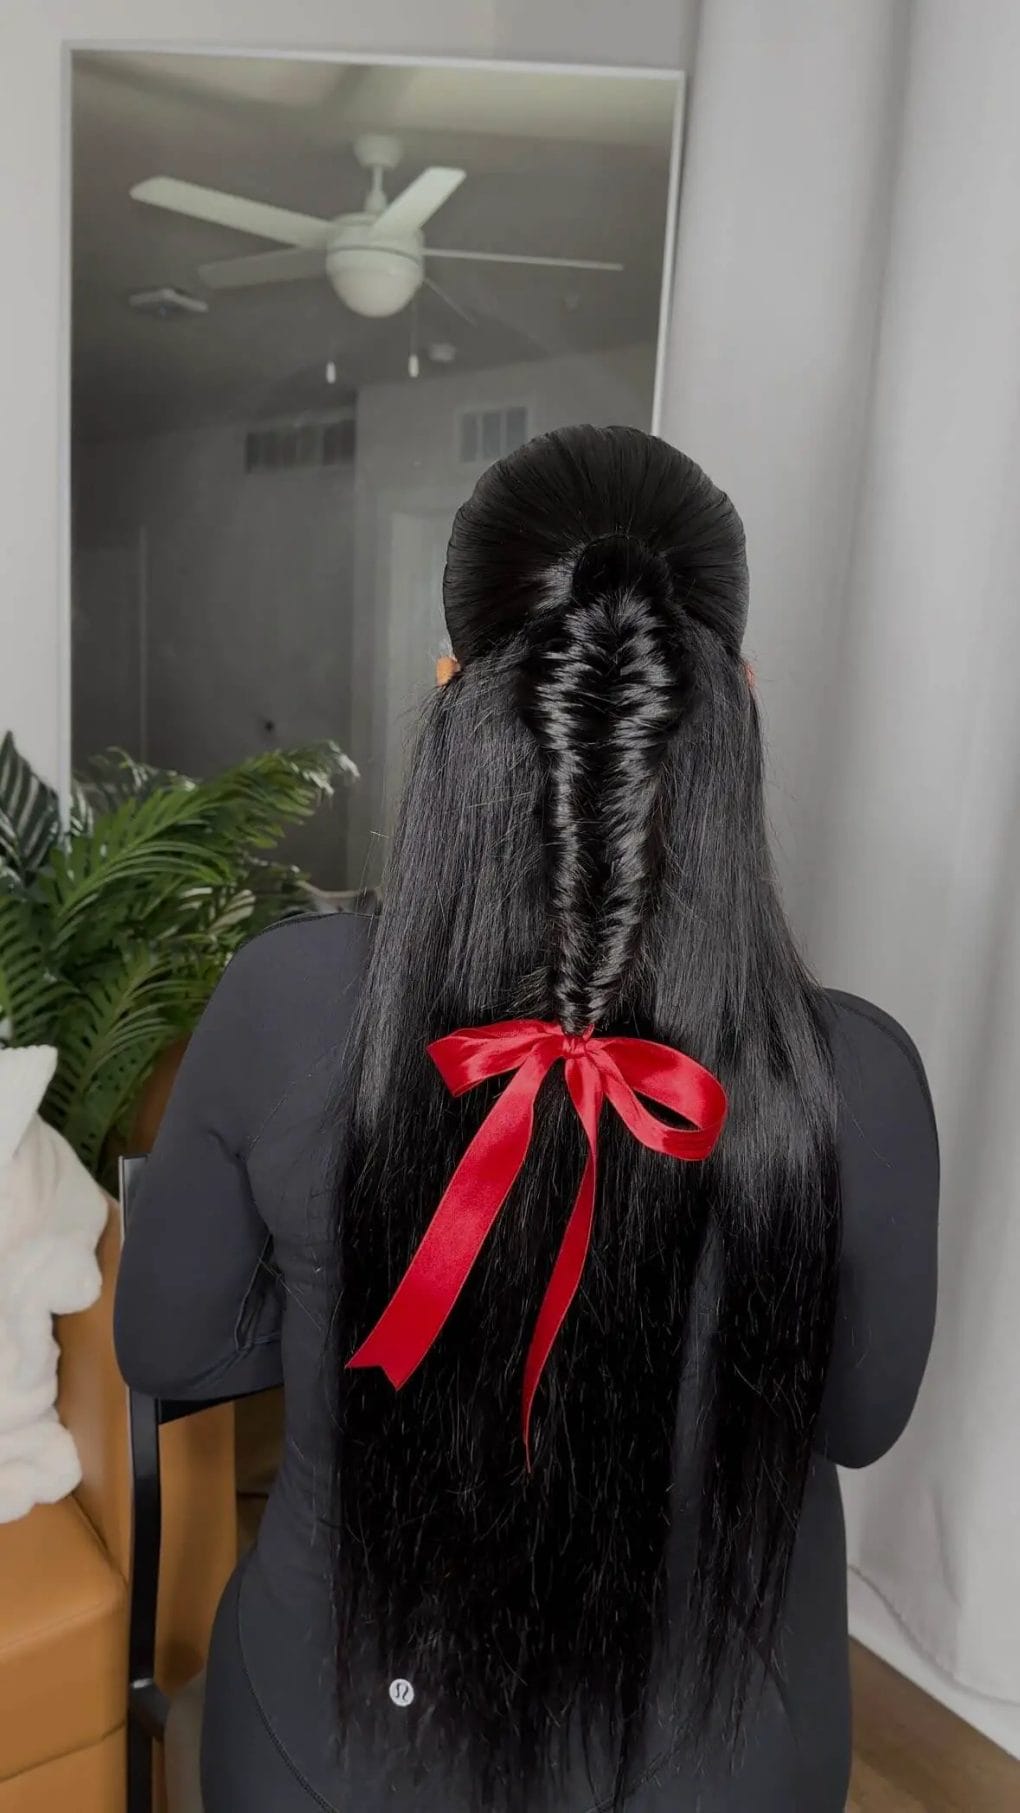 Sleek black hair with a tightly braided detail and red ribbon, adding an edge to a birthday style.